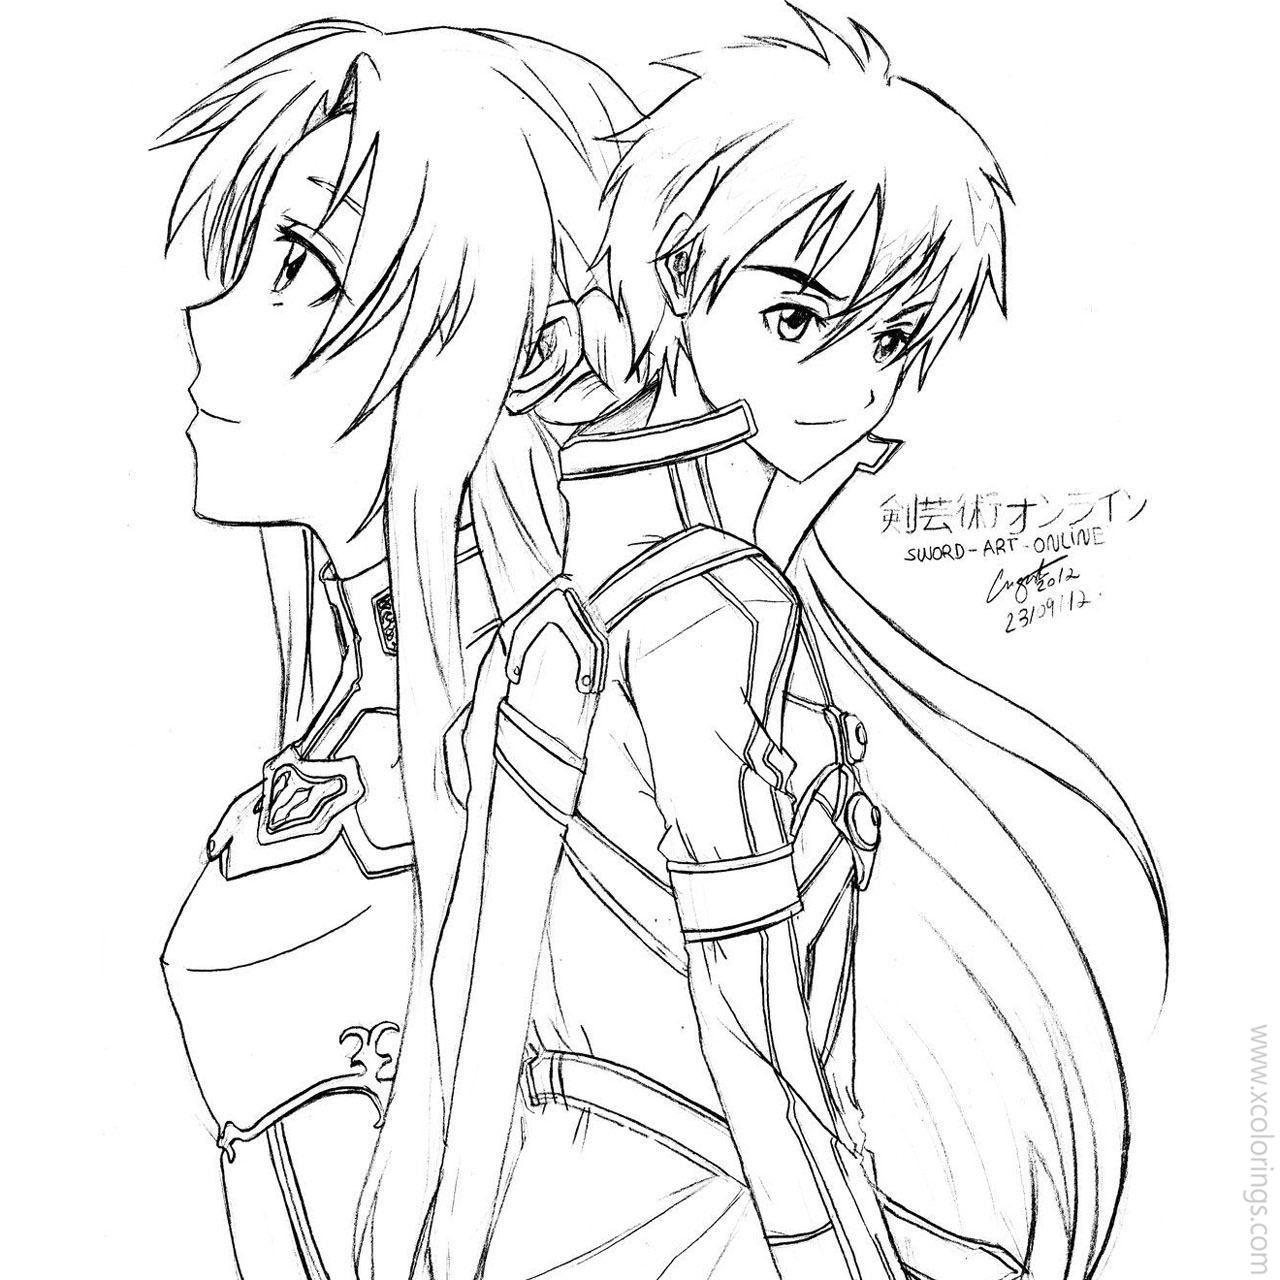 Free Sword Art Online Coloring Pages Fanart printable